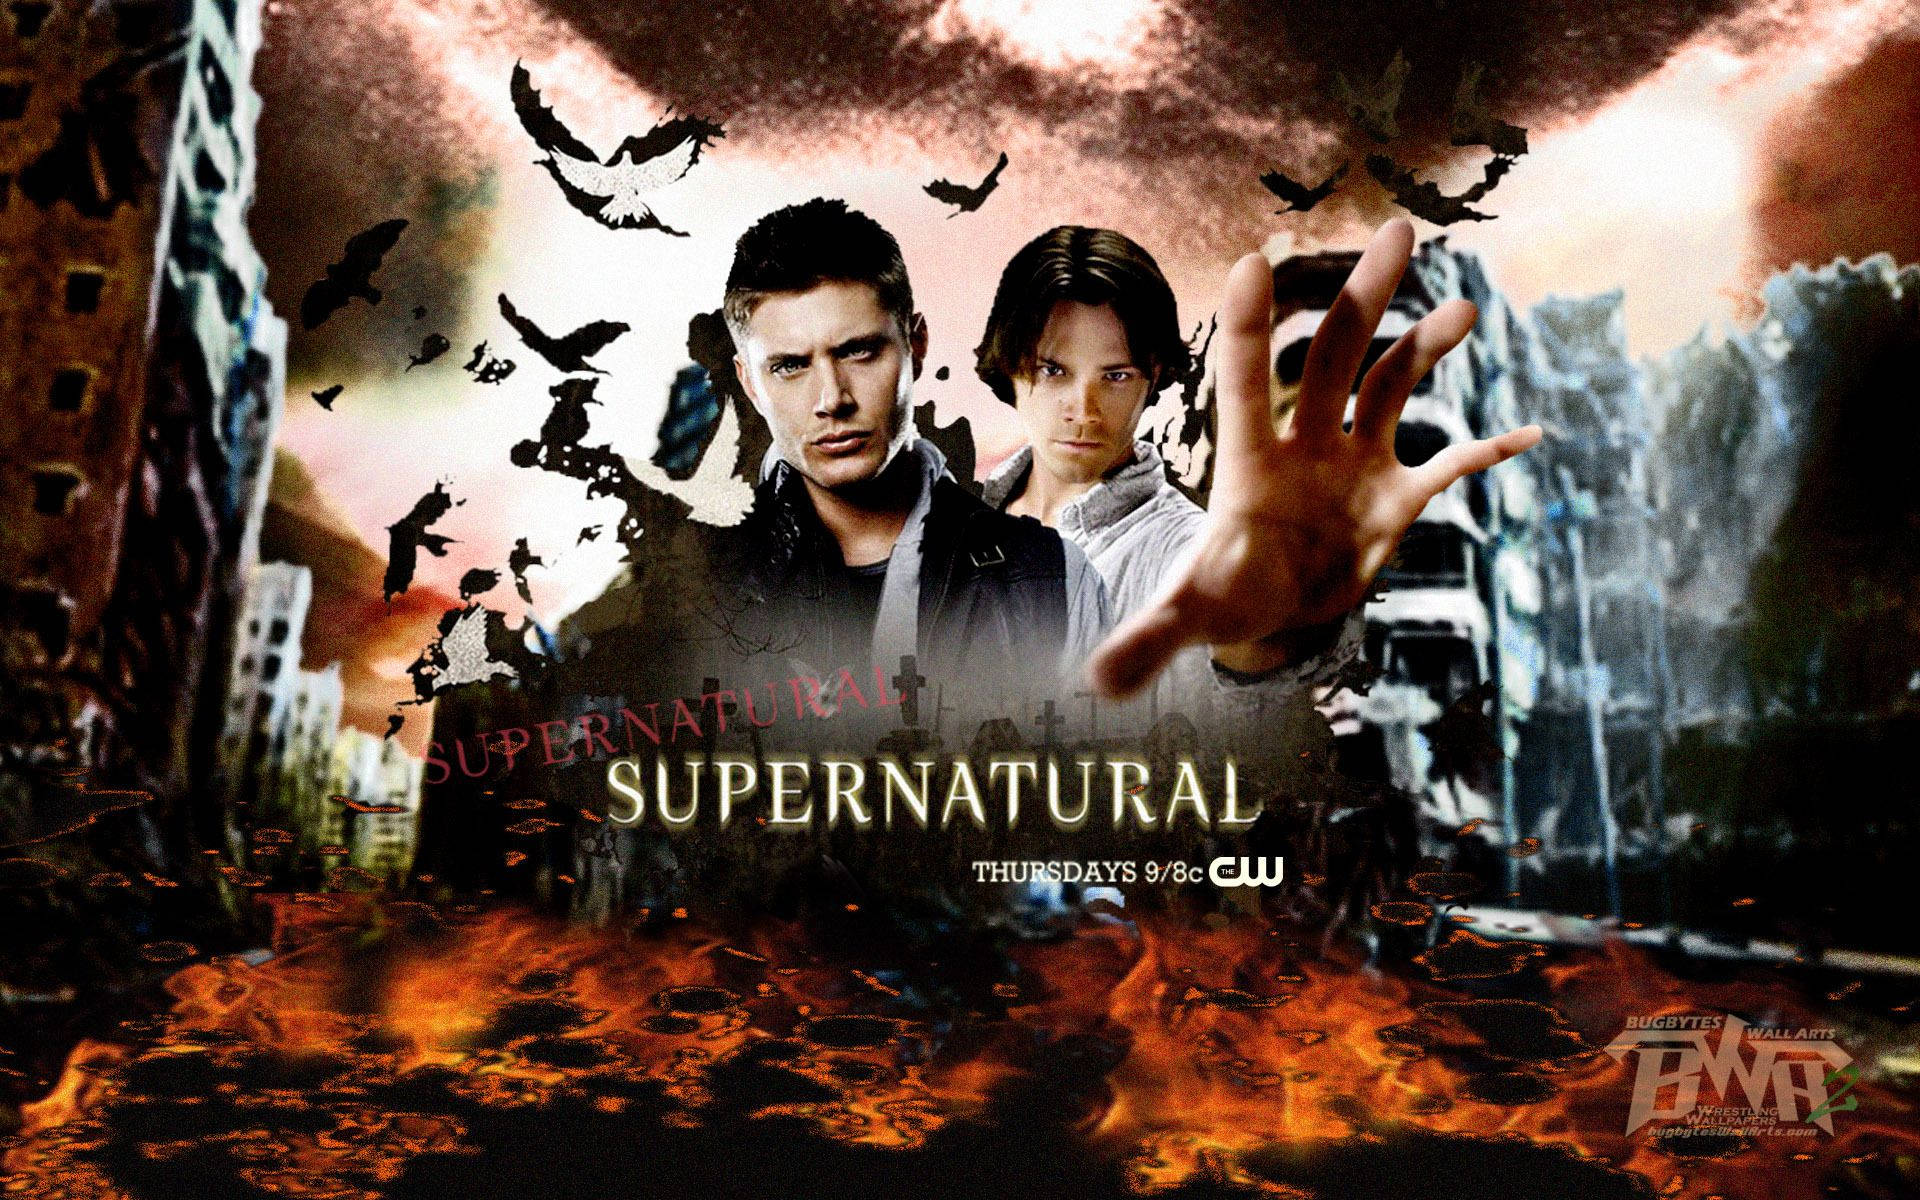 Brothers in arms - Dean and Sam Winchester of Supernatural Wallpaper